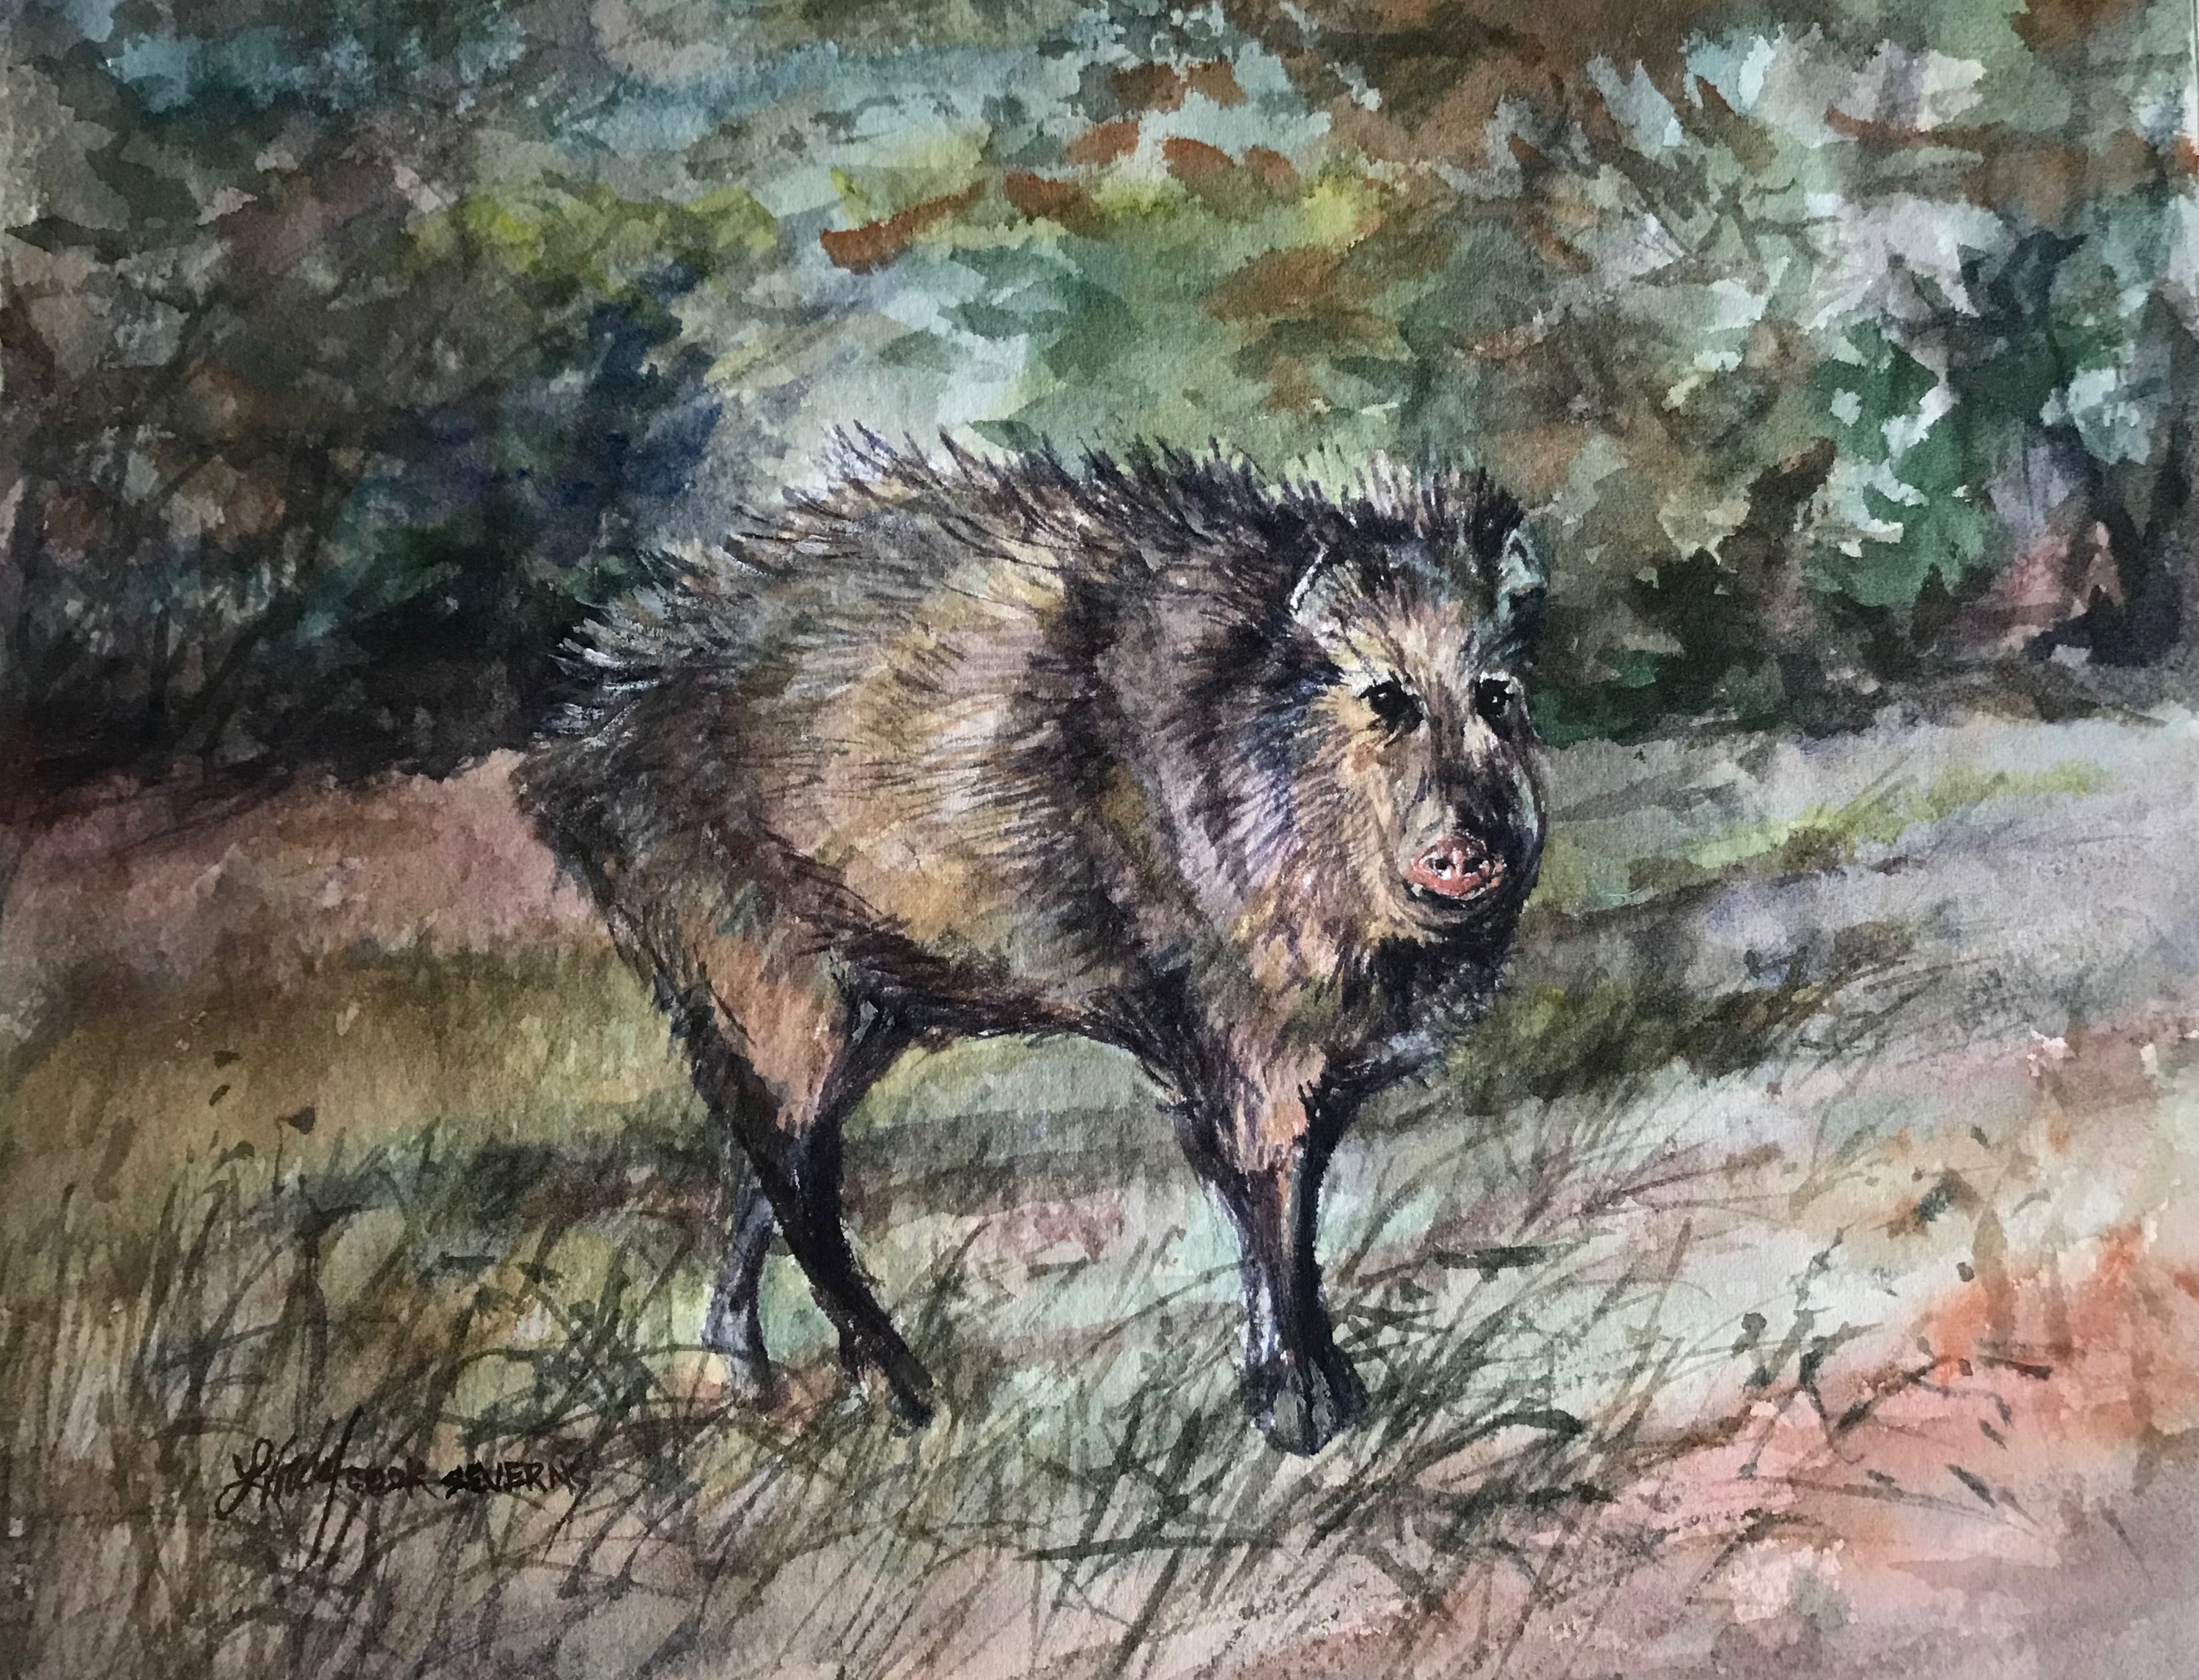 Javelina with an attitude 8x10 watercolor lindy cook severns ktttyr